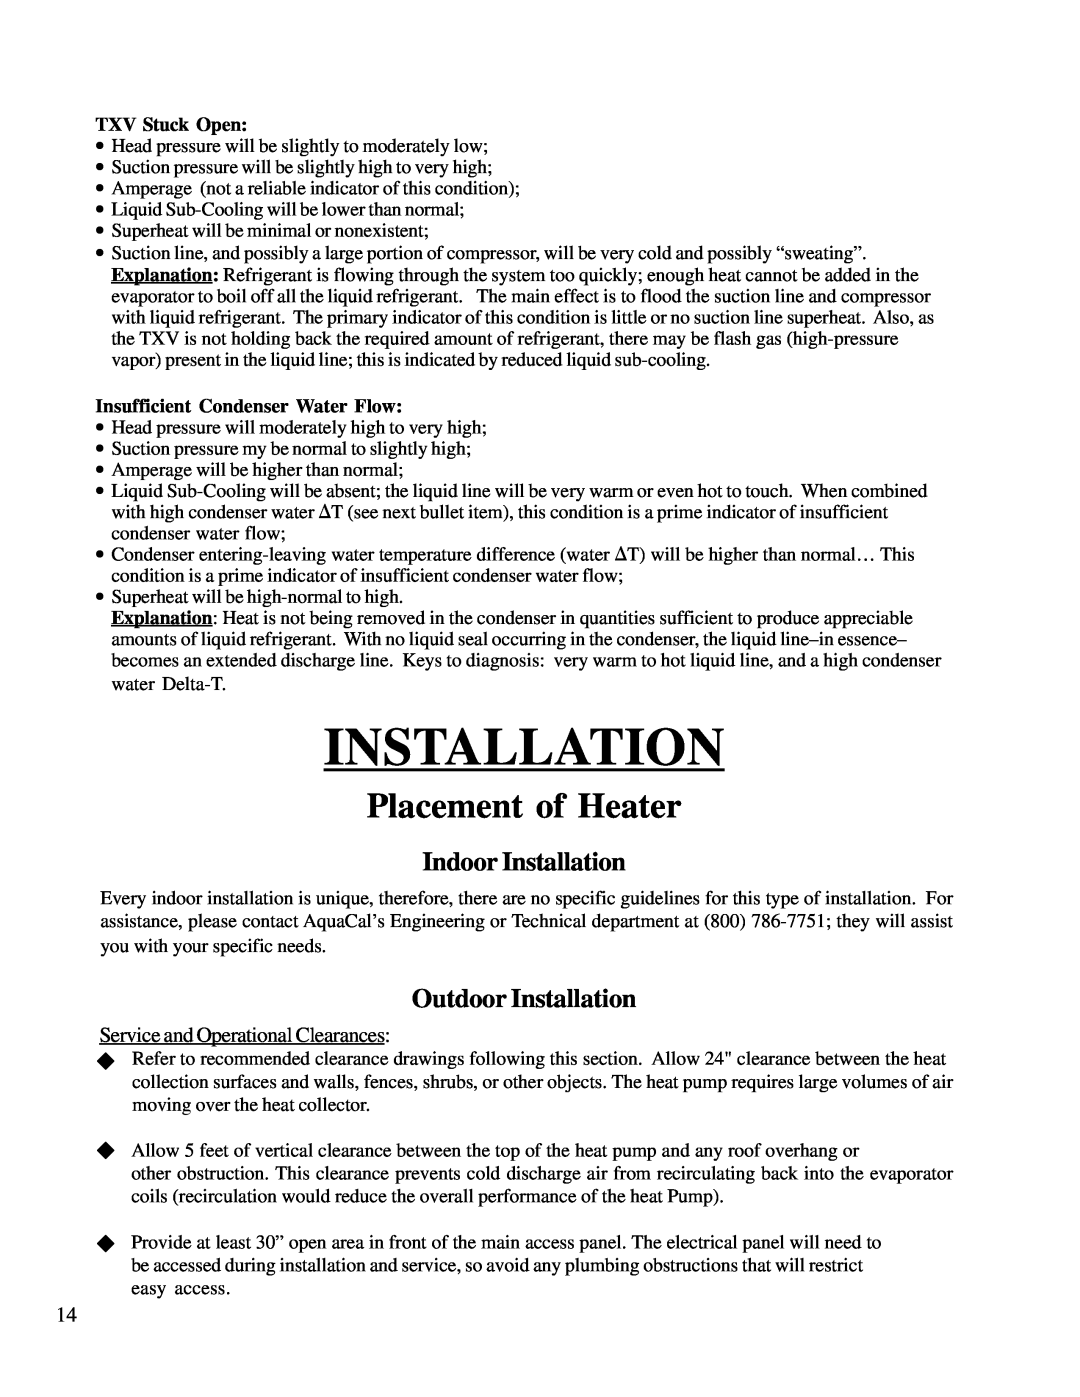 Aquacal T135, T65, T115 owner manual Placement of Heater, Indoor Installation, Outdoor Installation 